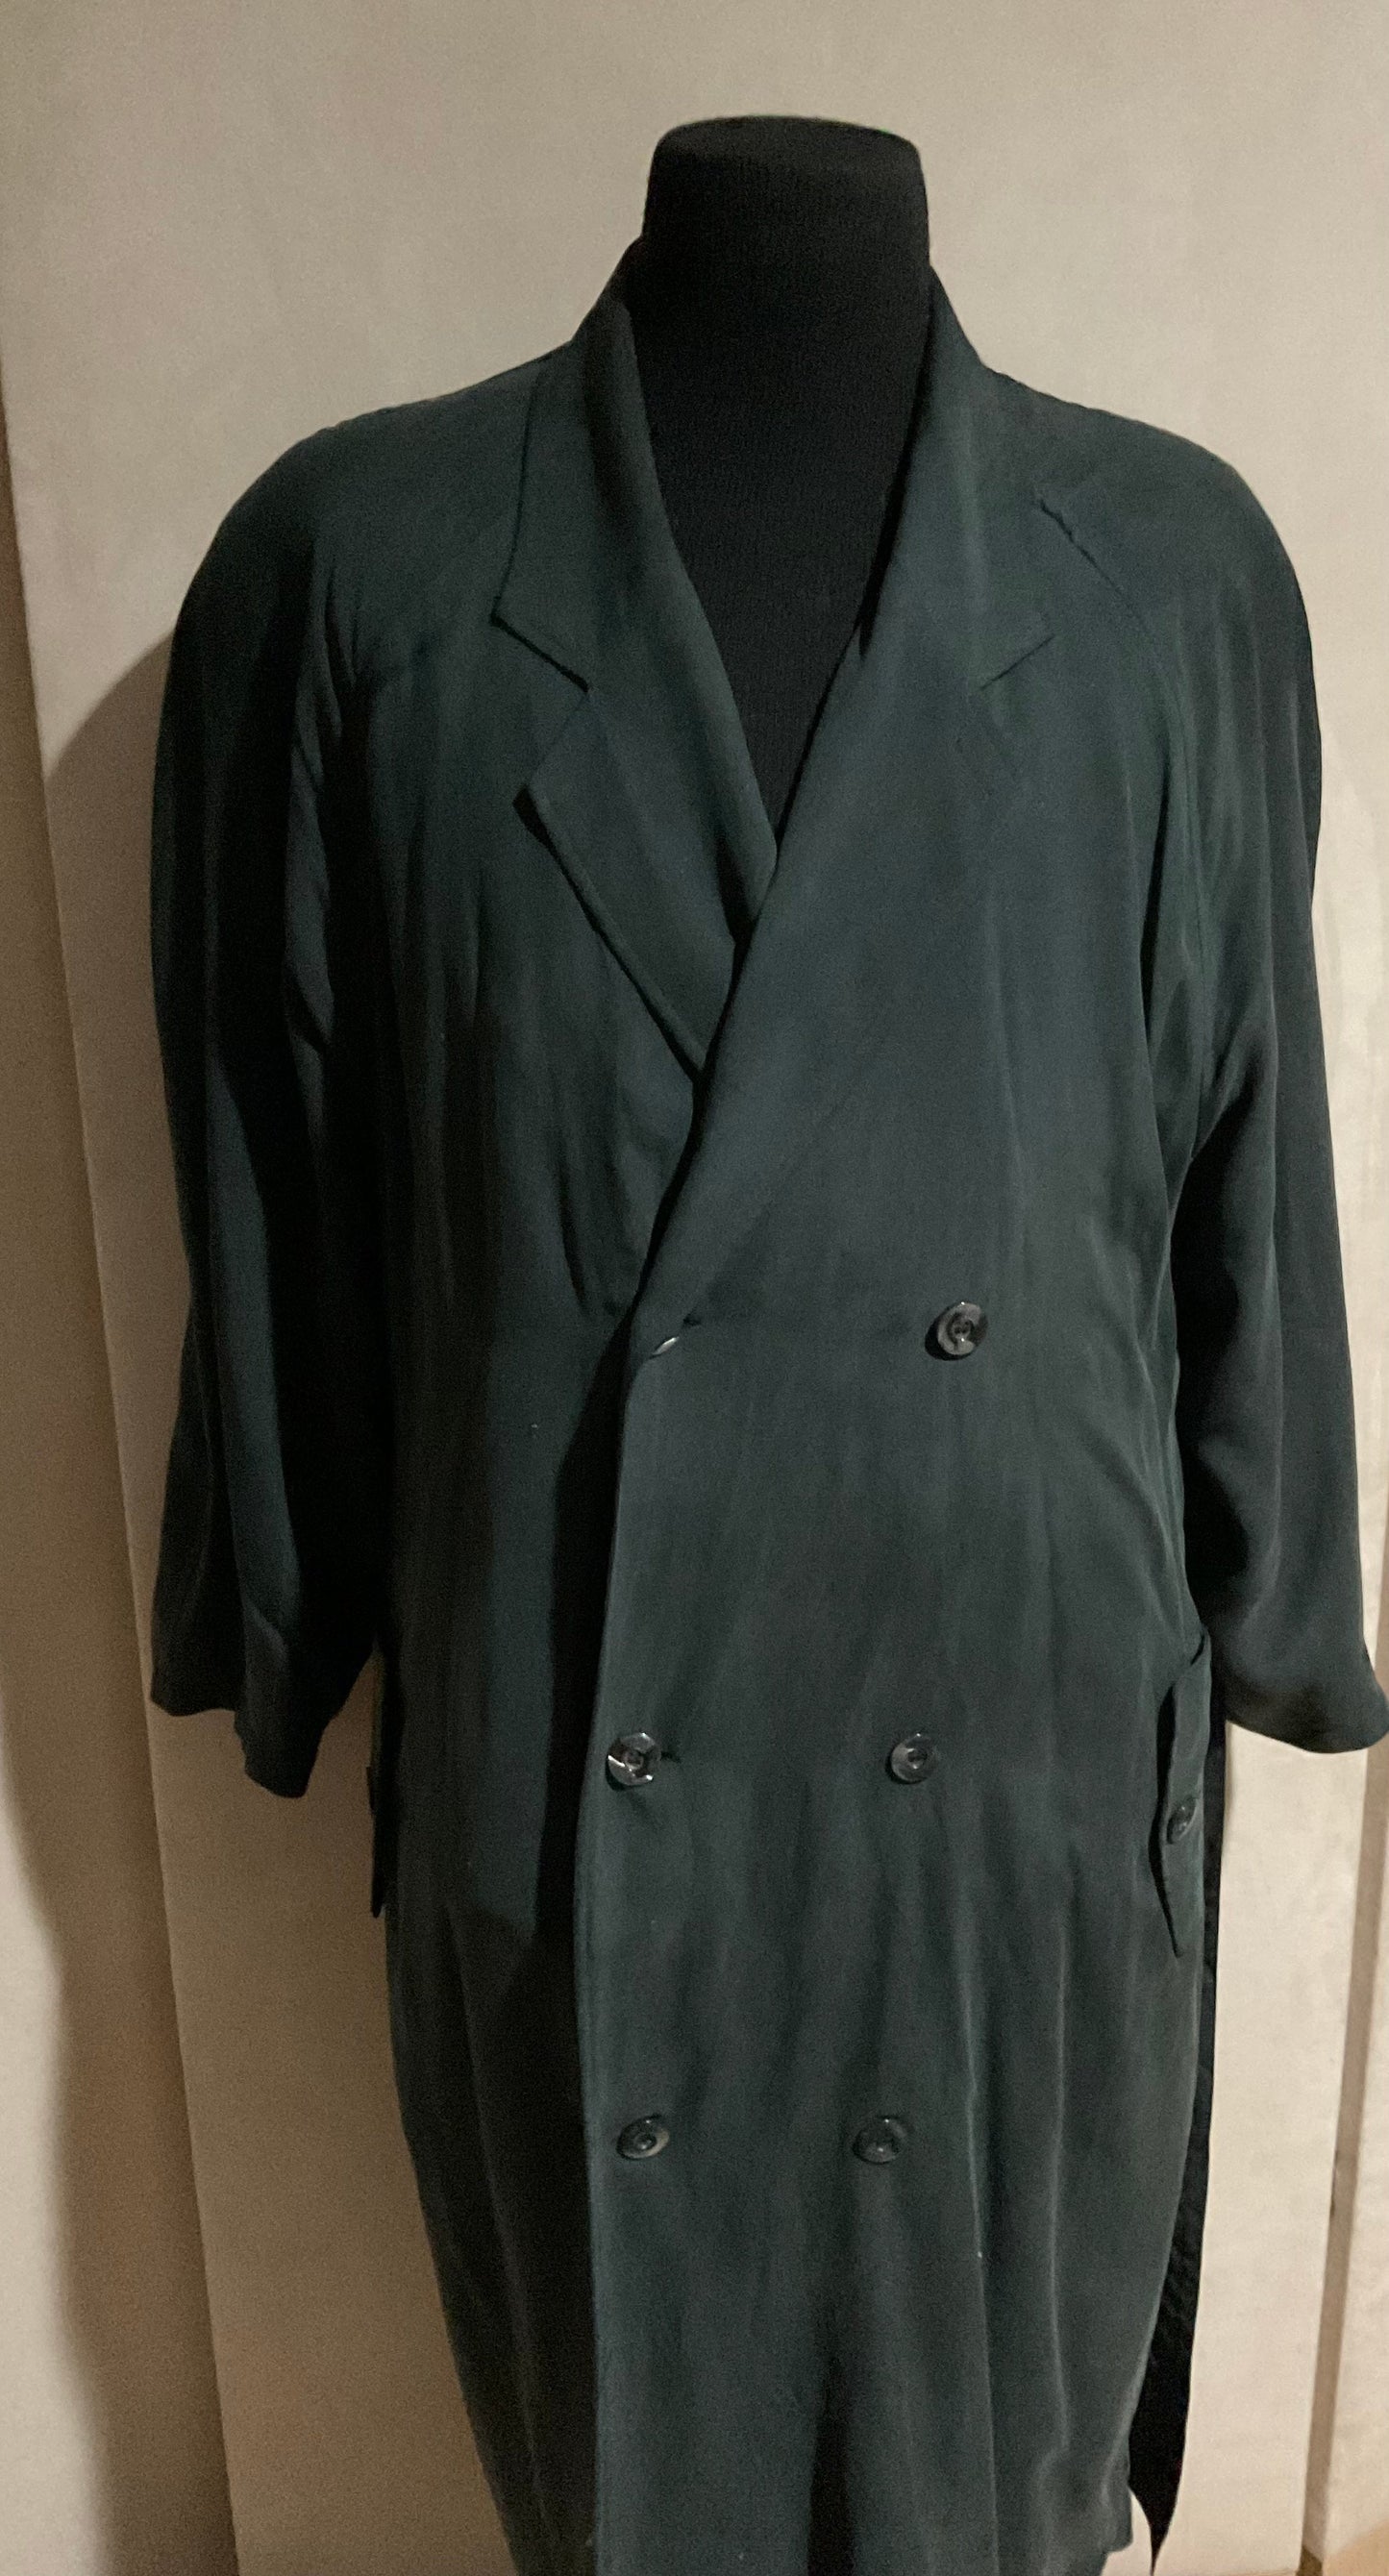 R P WASHED SILK DUSTER LONG COAT / DOUBLE BREASTED / NEW / BLACK / MEDIUM - LARGE